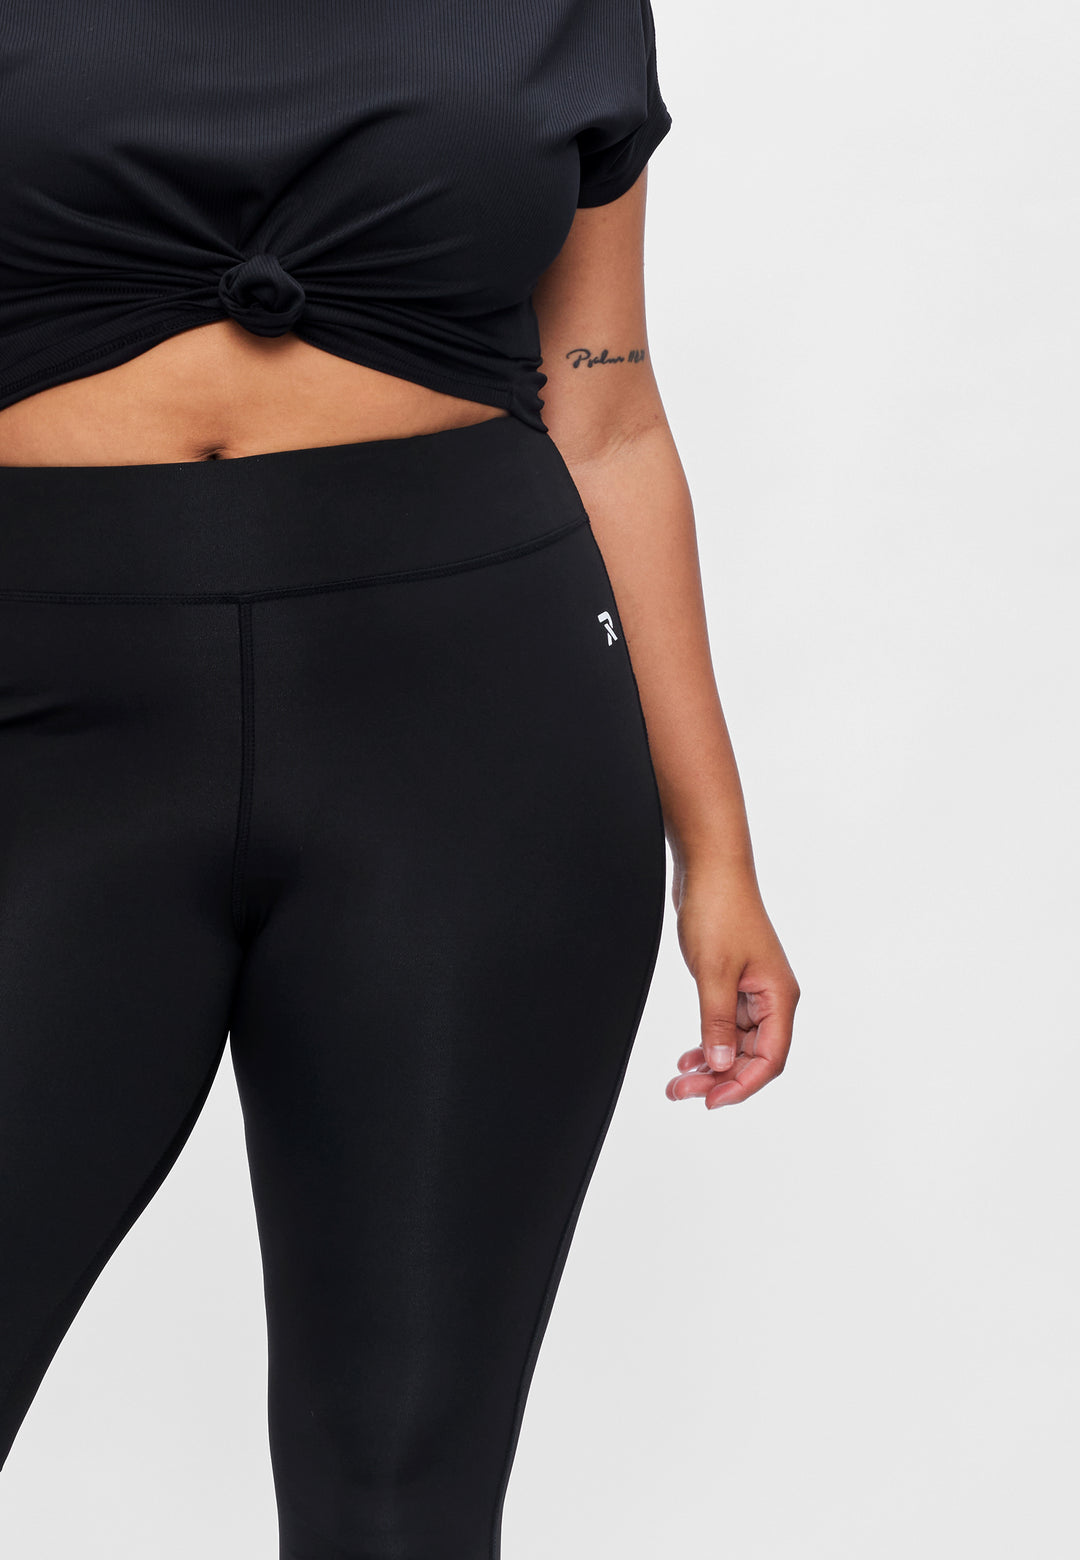 Women's sports legging Dry-Cool - sustainable Plus size